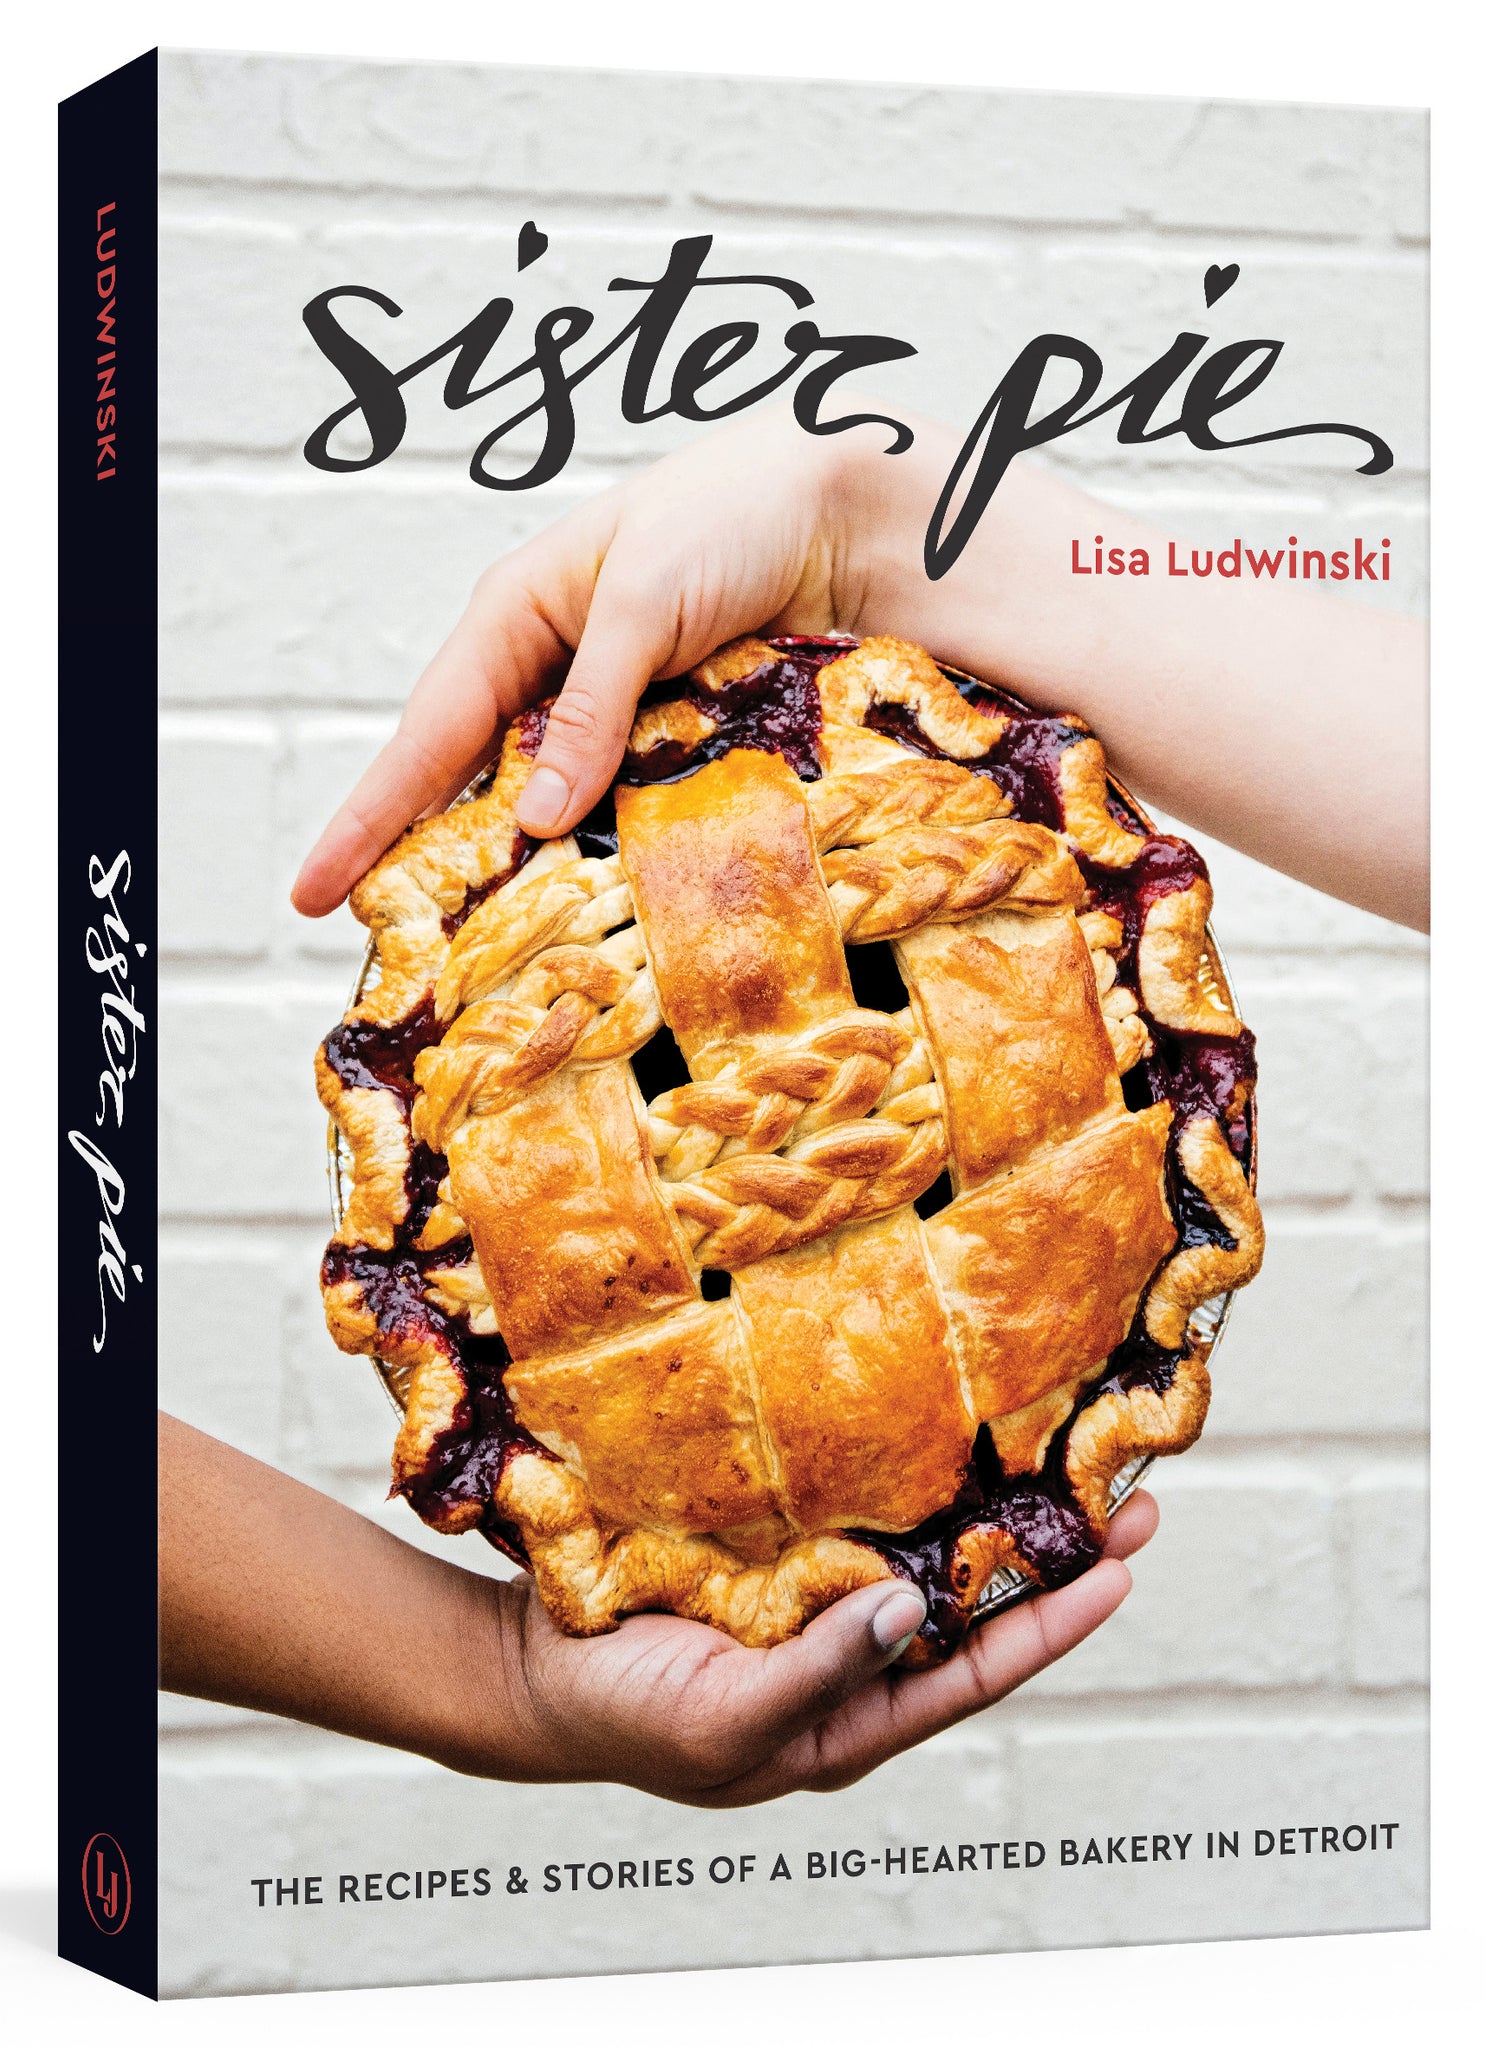 sister pie: the recipes and stories of a big-hearted bakery in detroit [a baking book]